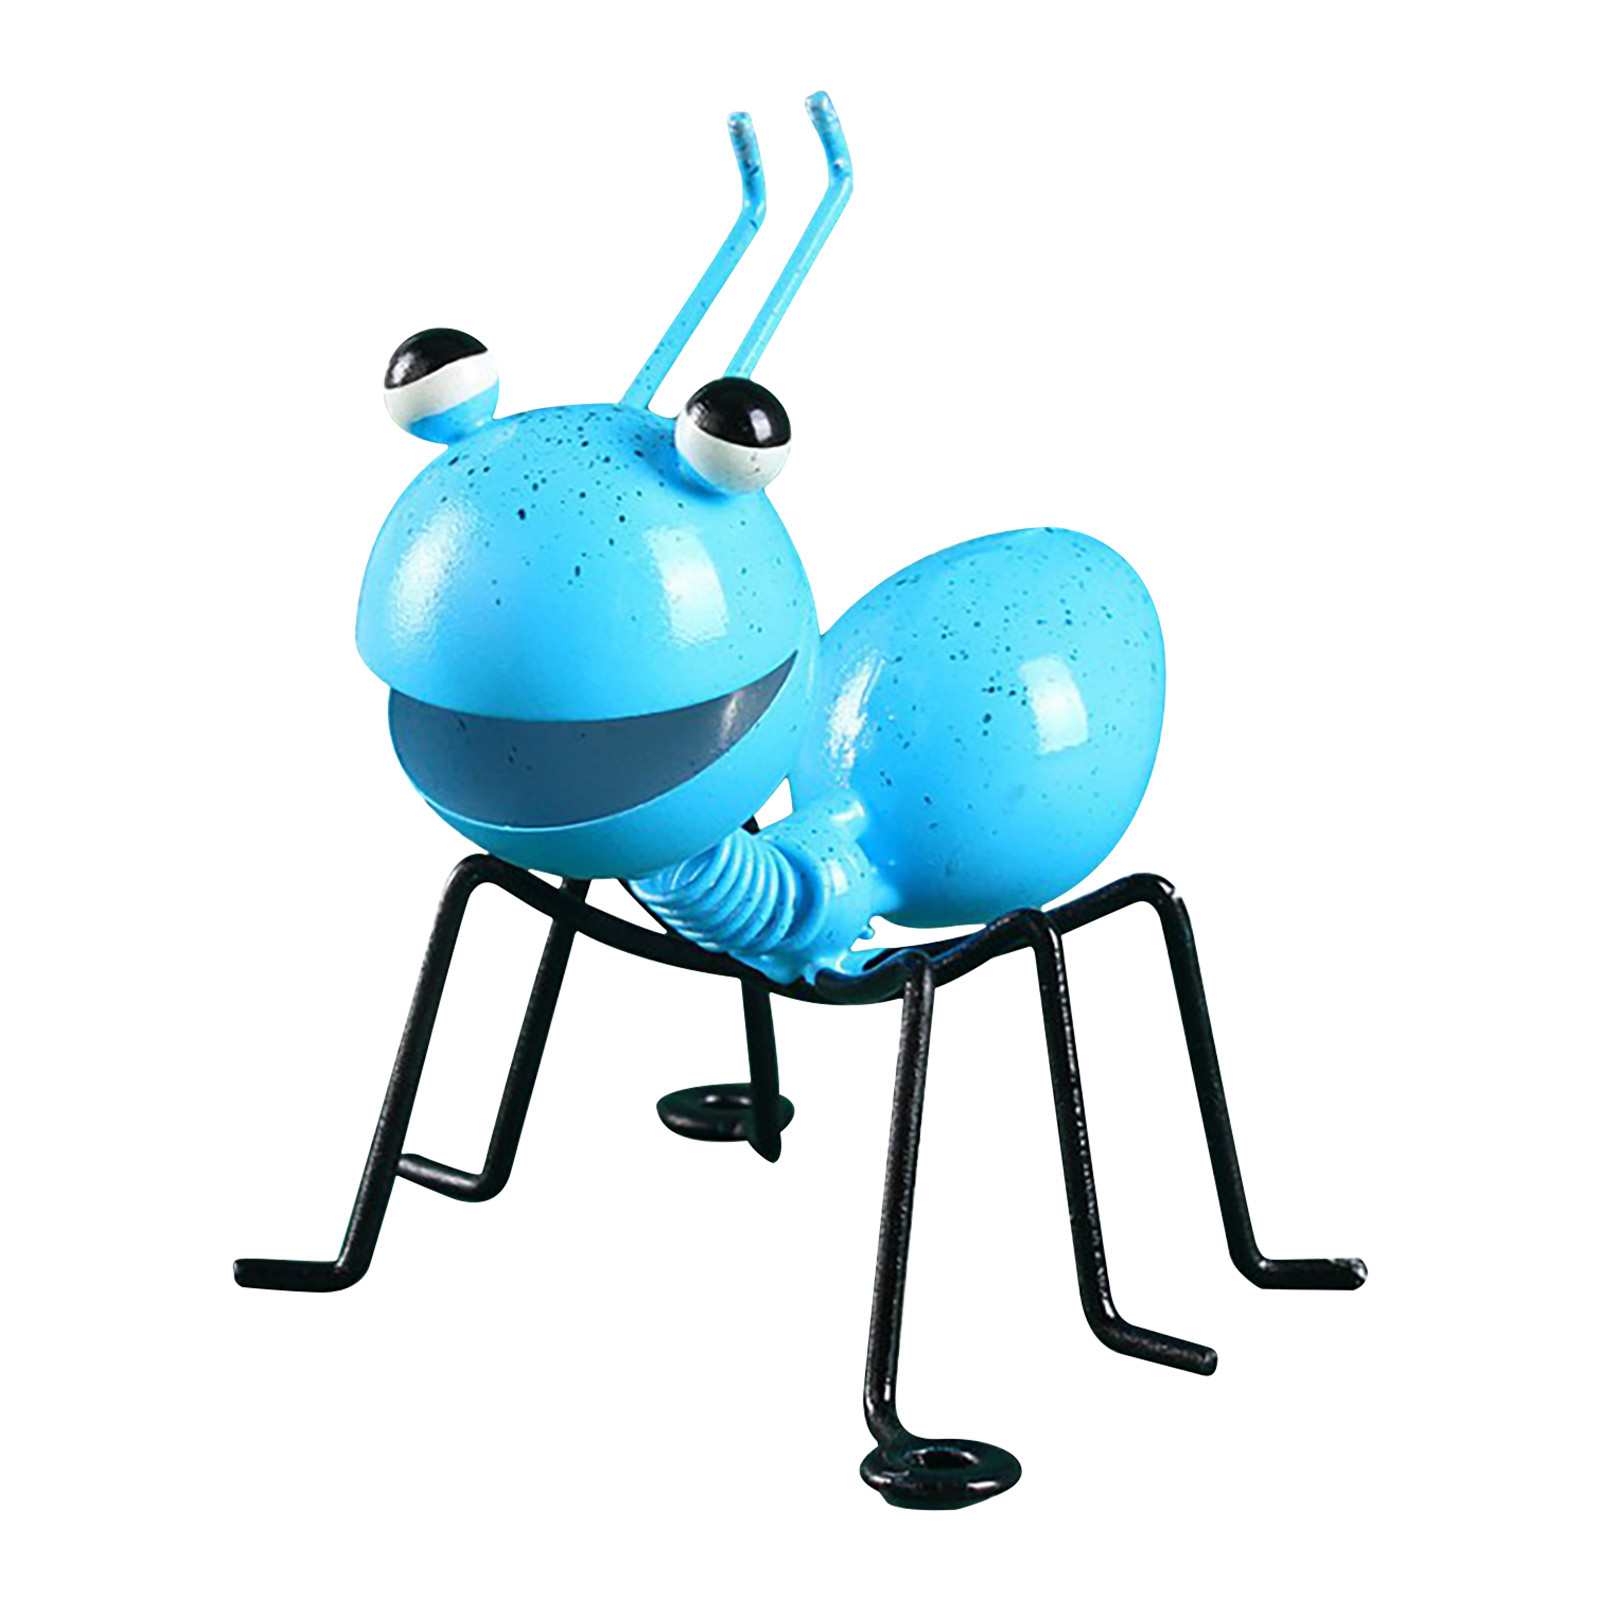 Bilu Ornaments Iron Art Ant Ornament Wall Hanging Home Decoration Outdoor Fall Decor Christmas Decorations - image 1 of 8